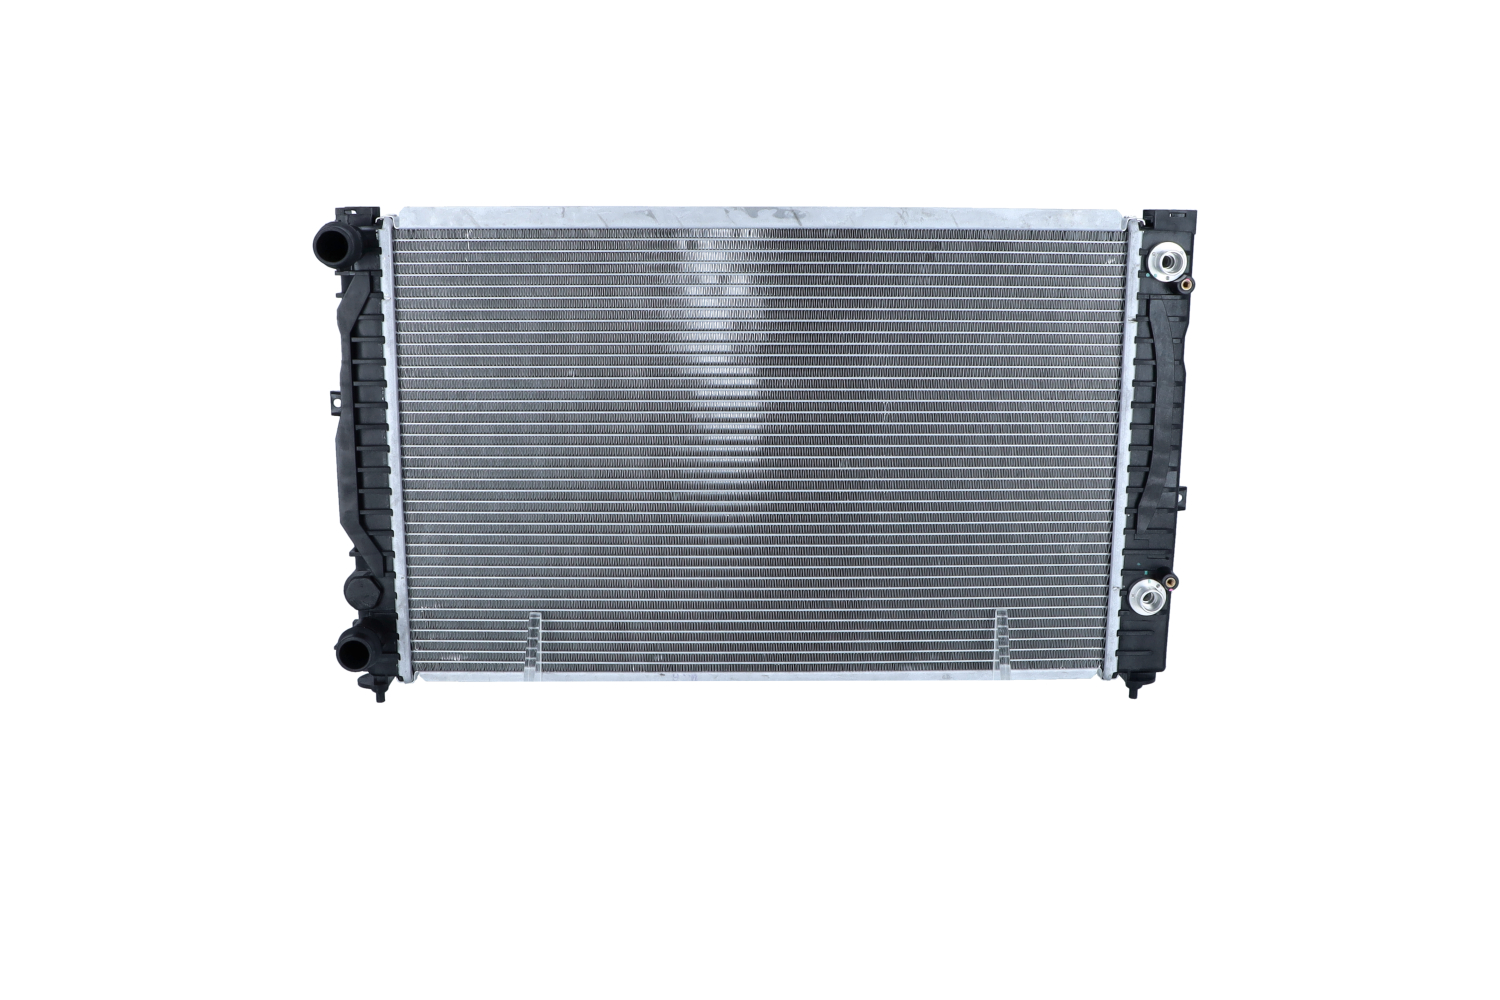 NRF EASY FIT 529504 Engine radiator Aluminium, 632 x 395 x 34 mm, with seal ring, Brazed cooling fins